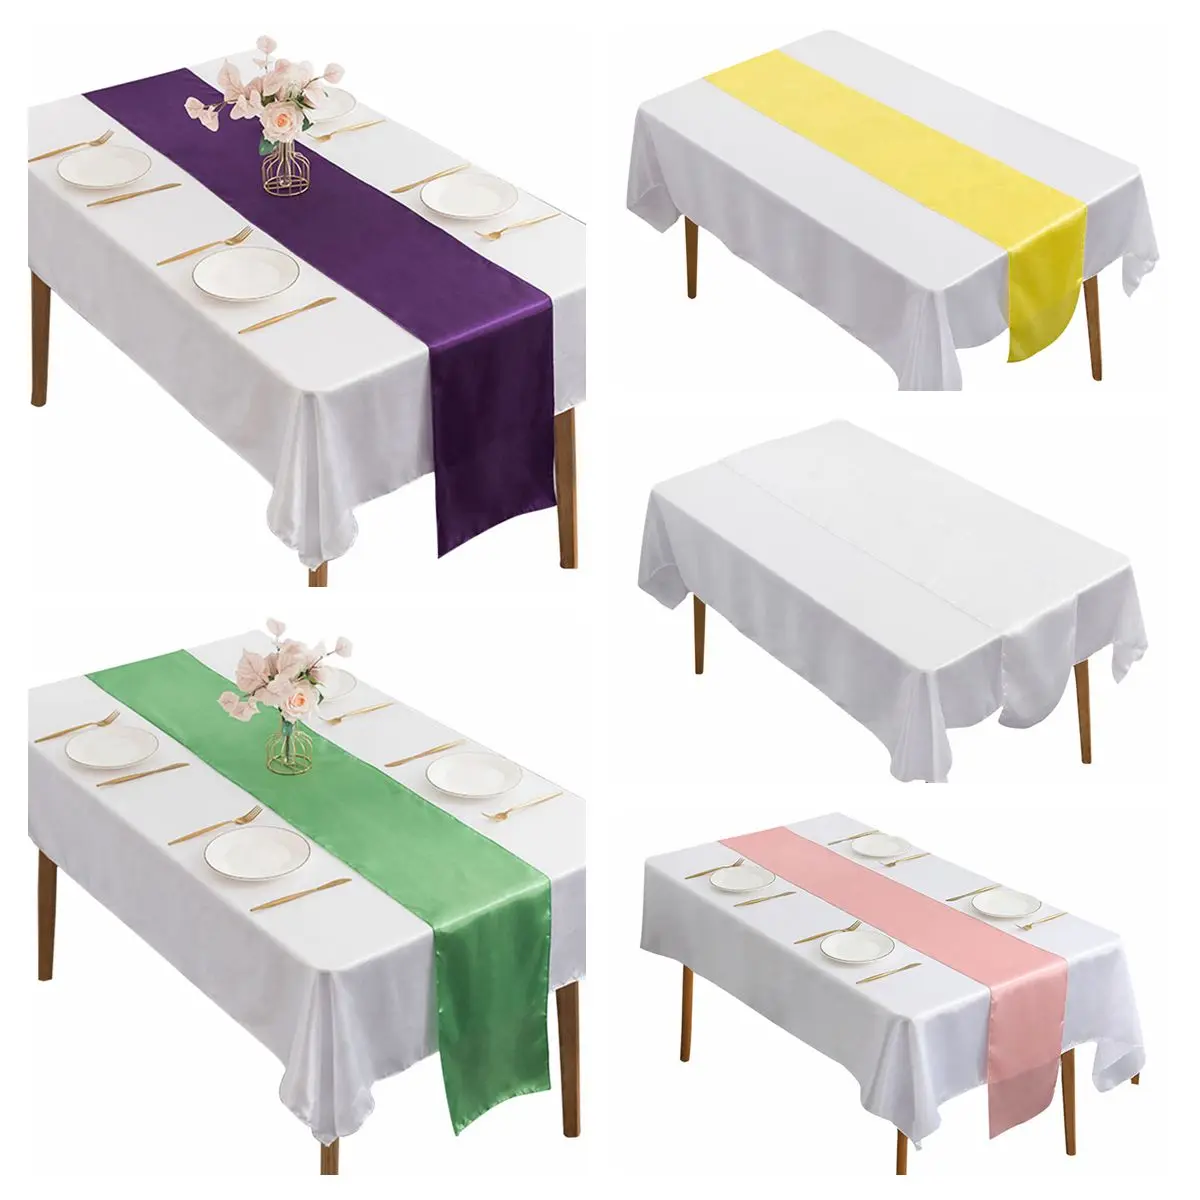 Solid Color Satin Table Runner Table Cover For Home Rustic Wedding Baptism Birthday Party Decoration Catering Hotel Table Decor